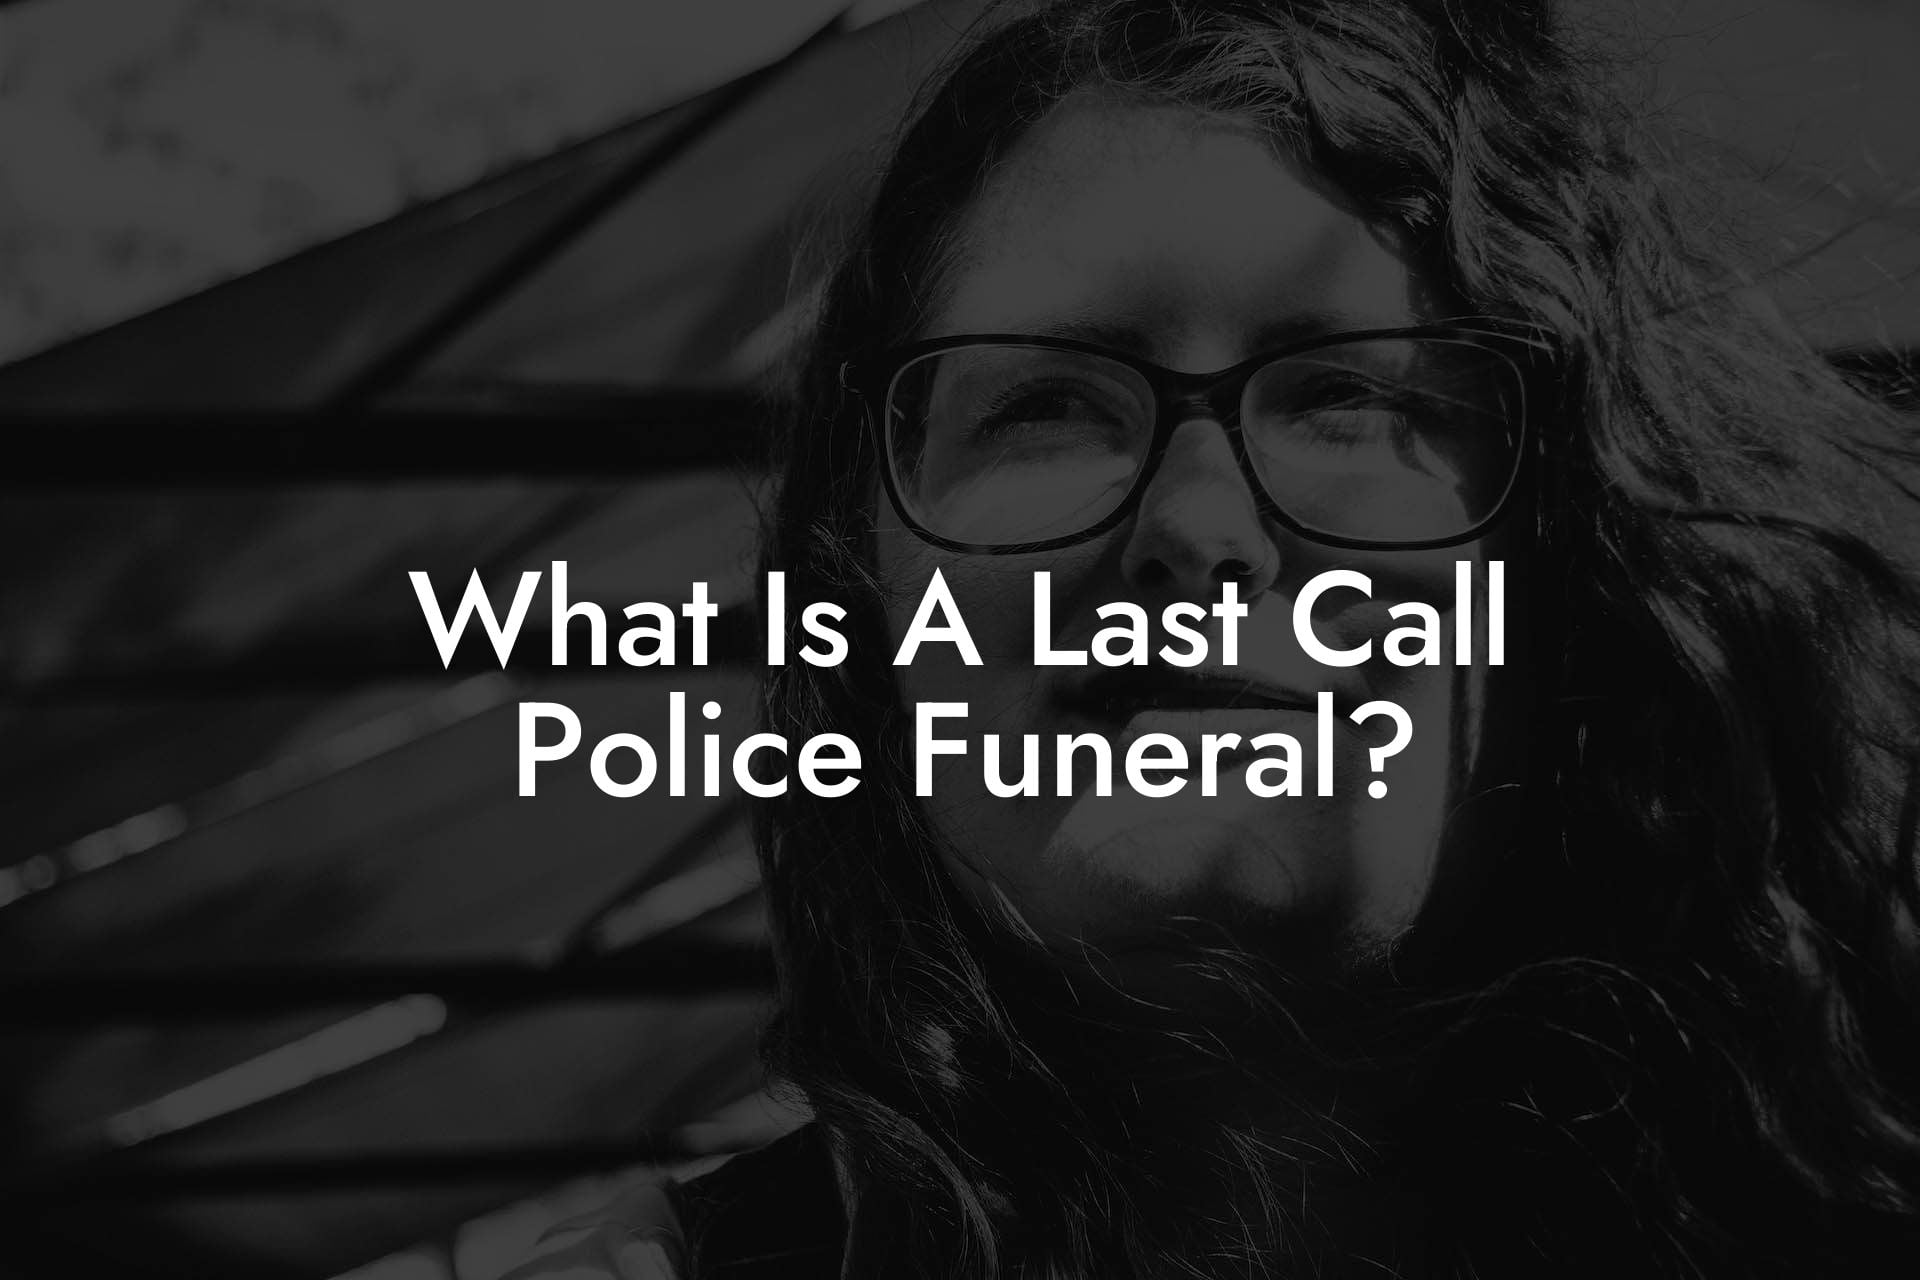 What Is A Last Call Police Funeral?